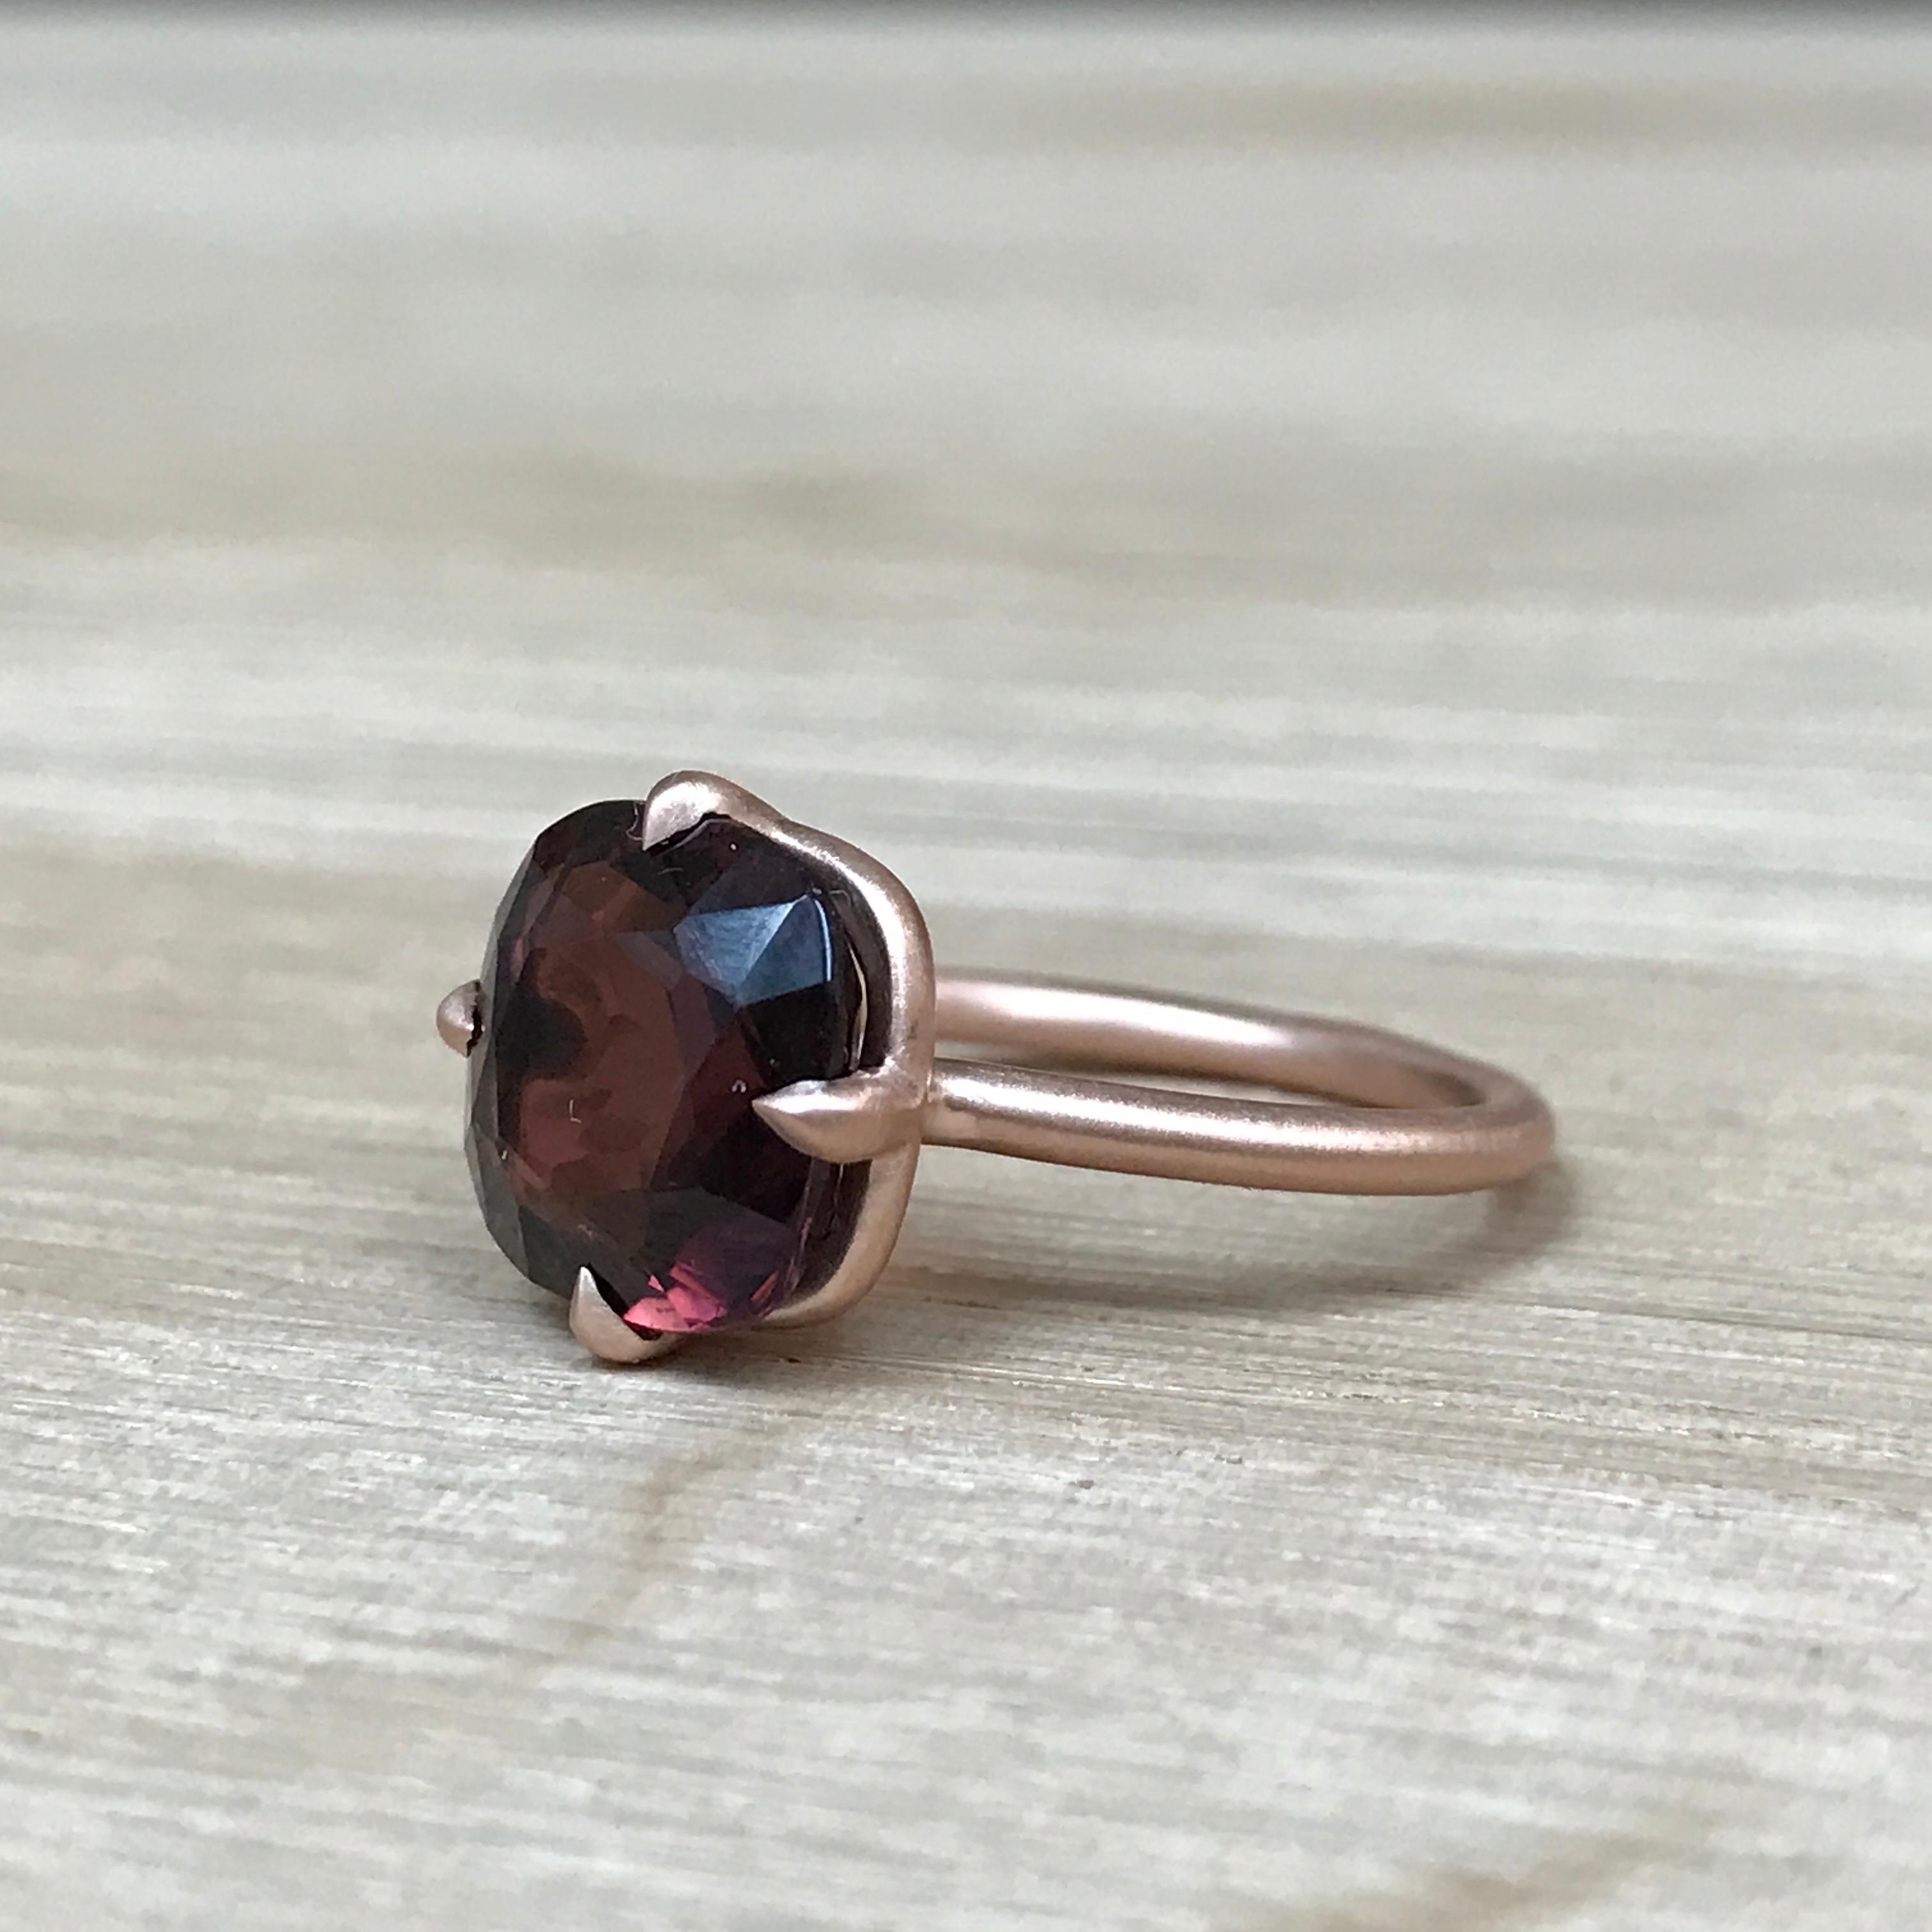 This 4.42 carat tourmaline ring is a unique cherry wine color that catches the light perfectly. The setting was carefully designed by Finn to enhance the shape of the stone and the use of satin finished rose gold highlights the natural earthy